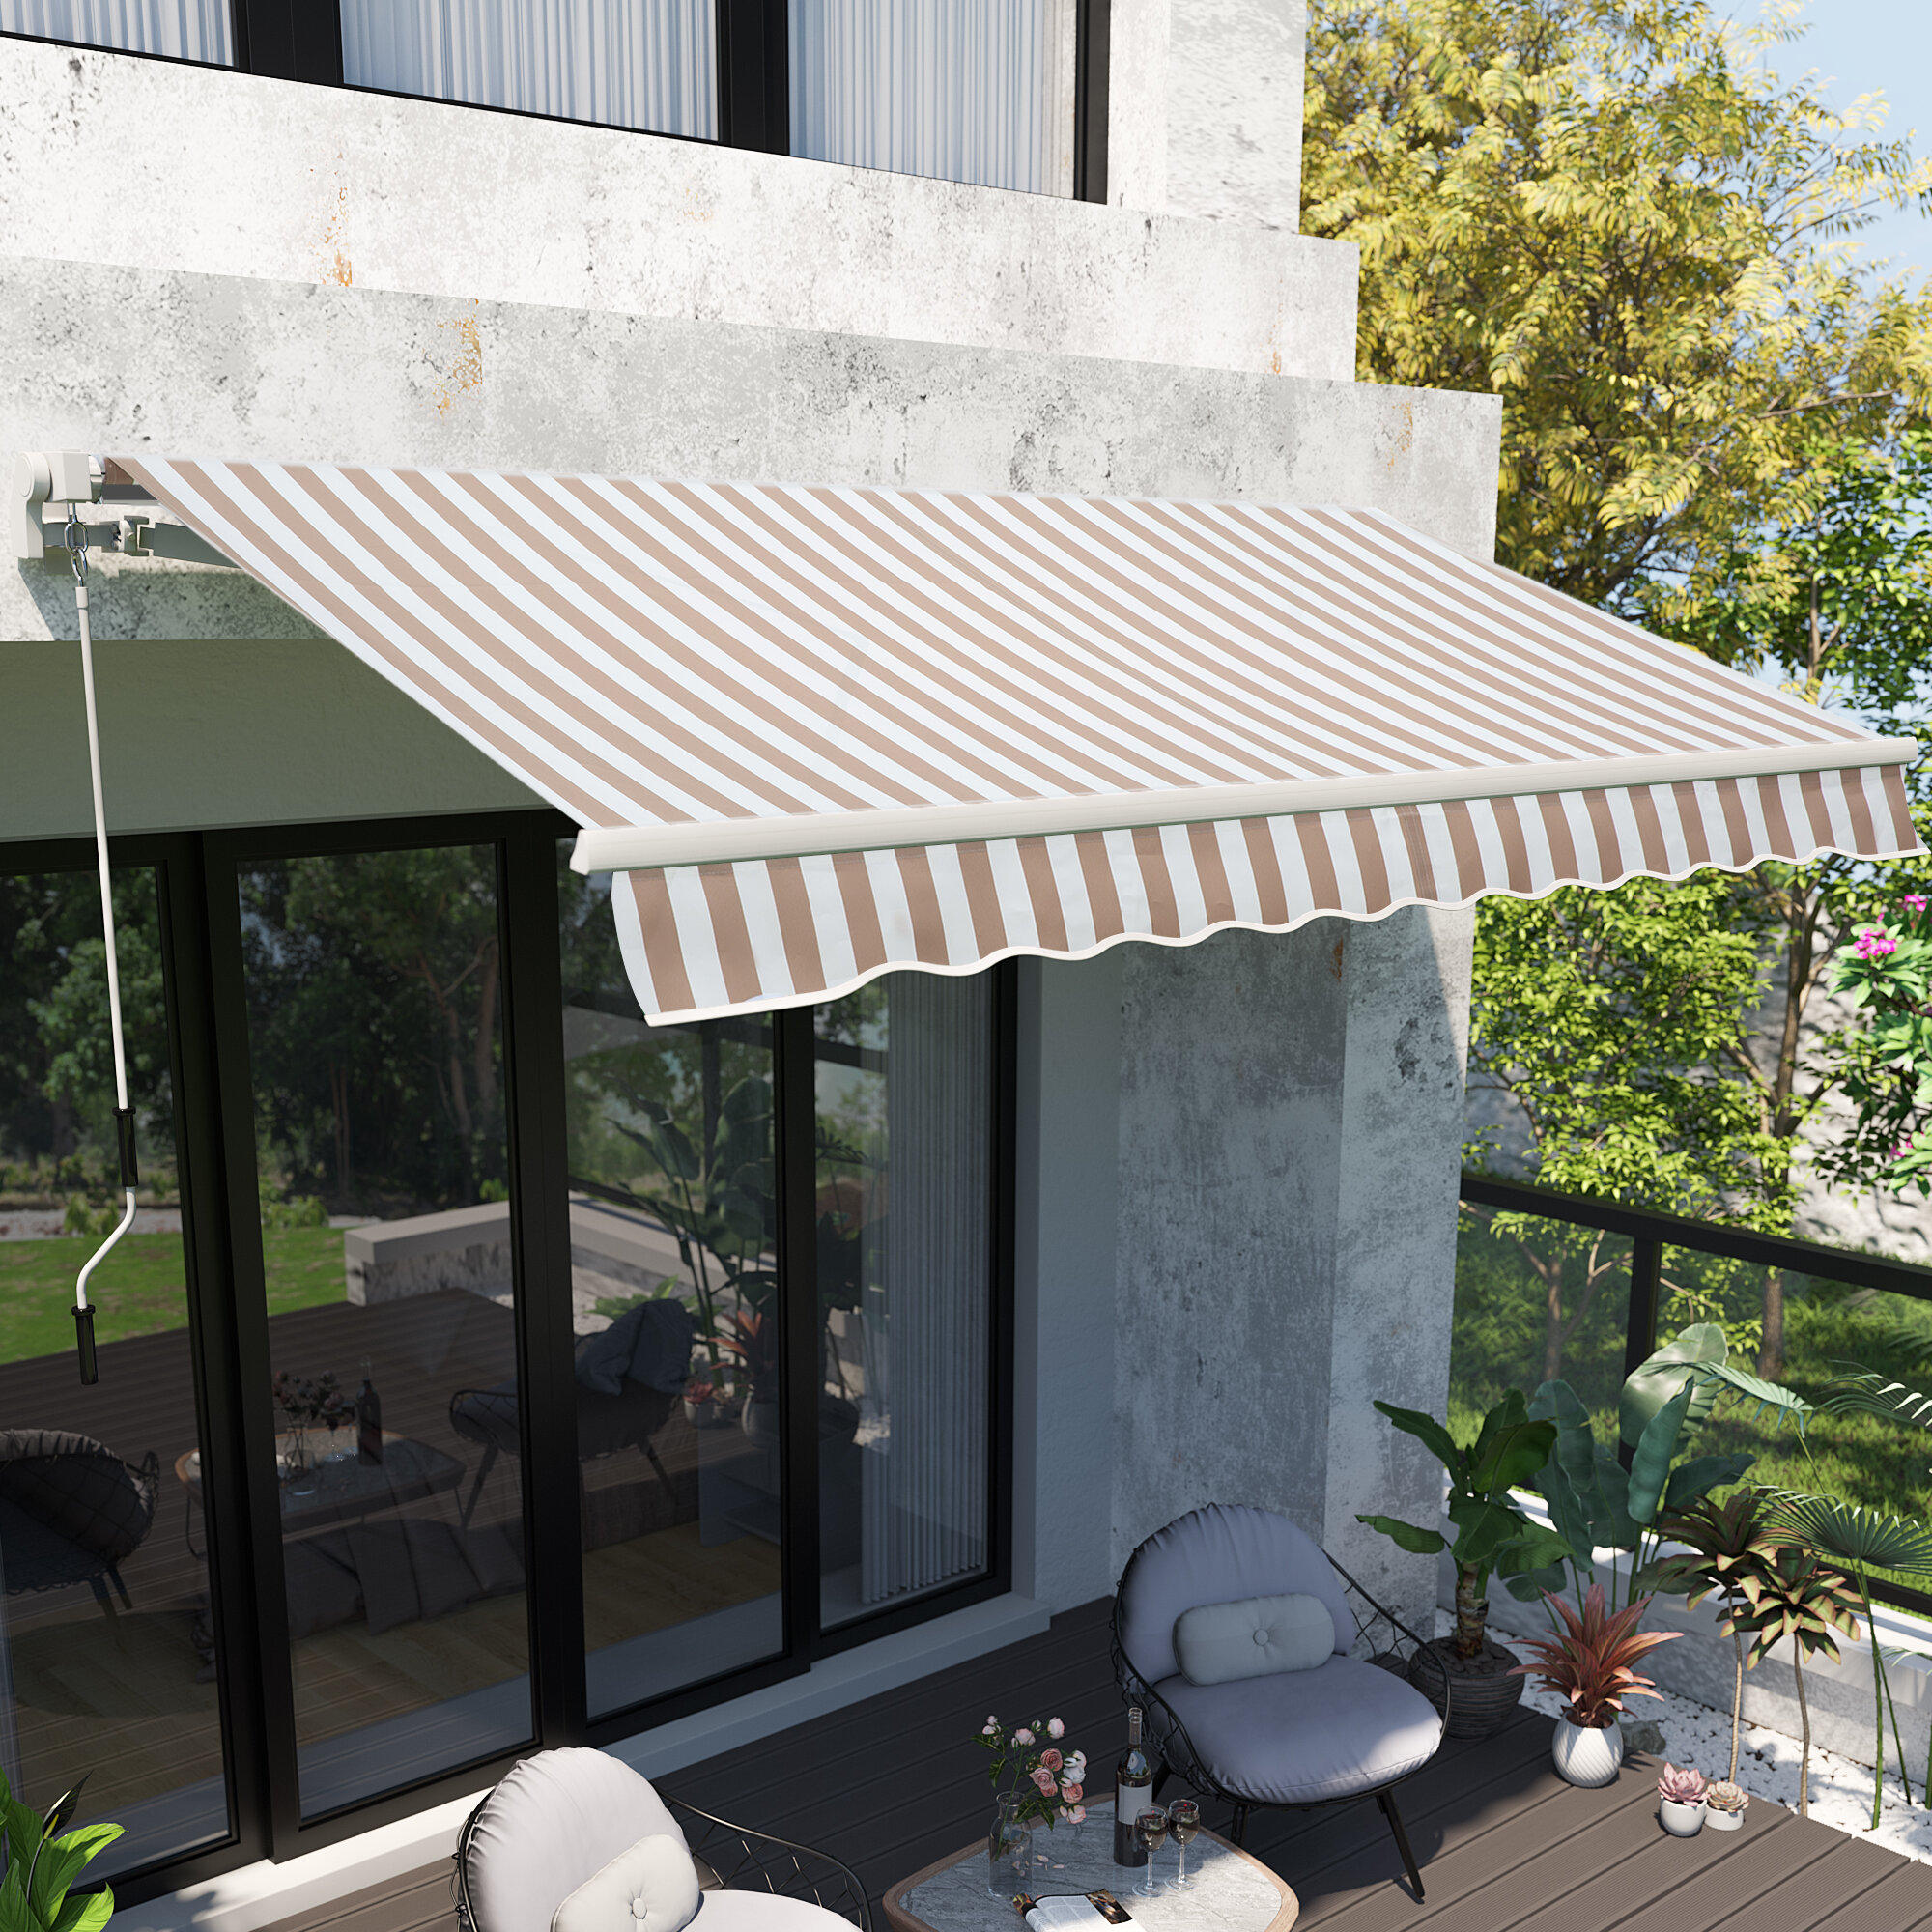 Details about   Retractable Sun Shade Shelter Patio Awning Canopy Outdoor Yard Backyard Gray 6.5 